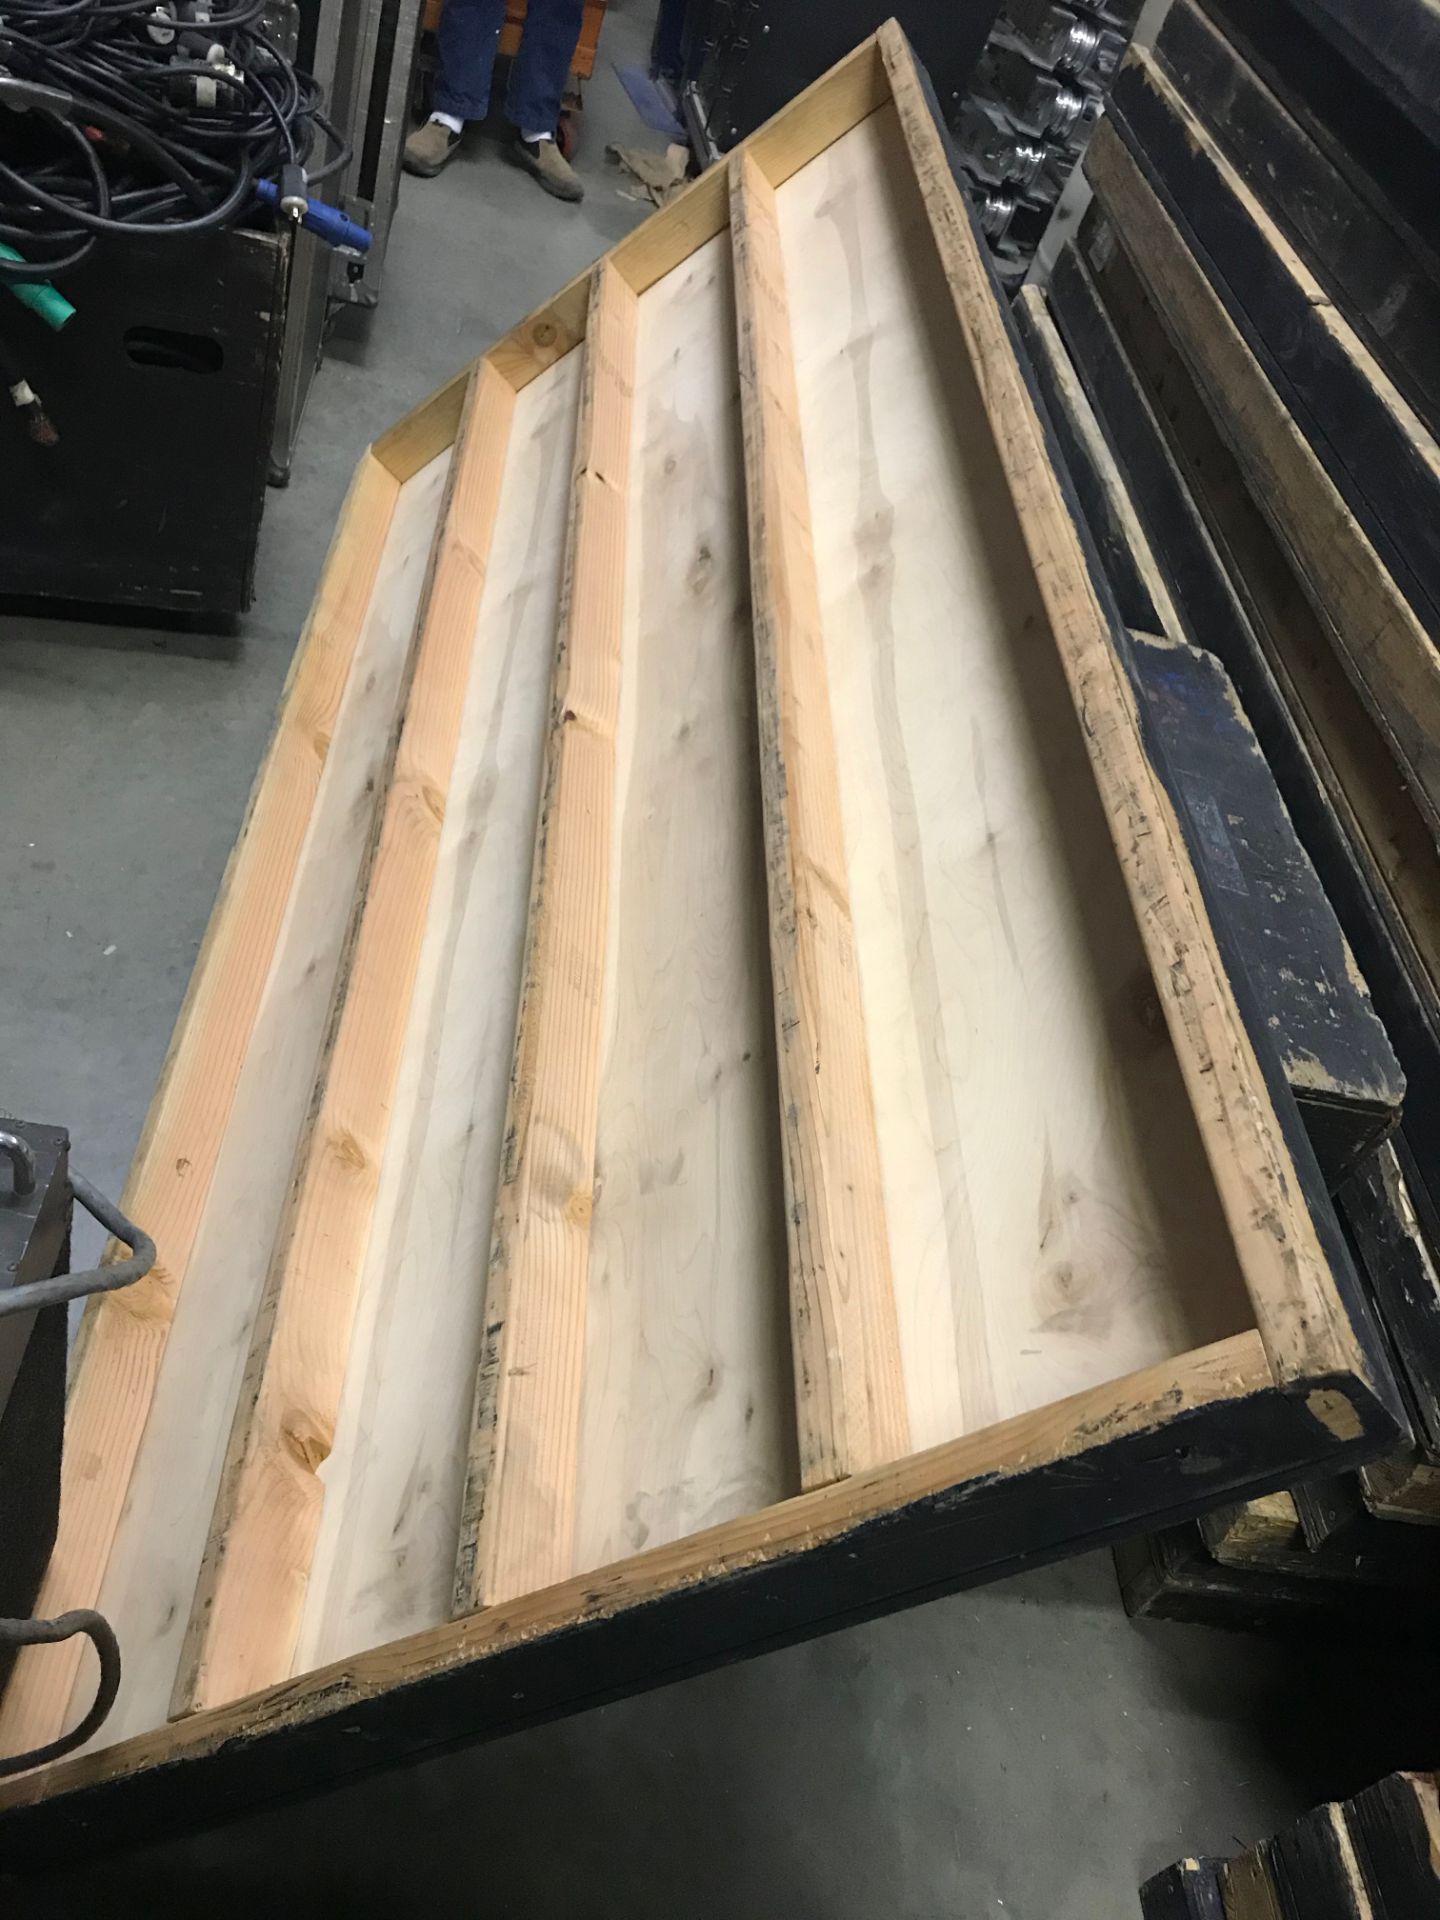 LOT OF: (10) 4' X 8' WOODEN STAGE DECKING (4" RISE) MADE OF 3/4 PLYWOOD SHEET AND (5) 2 X 4'S - Image 3 of 5